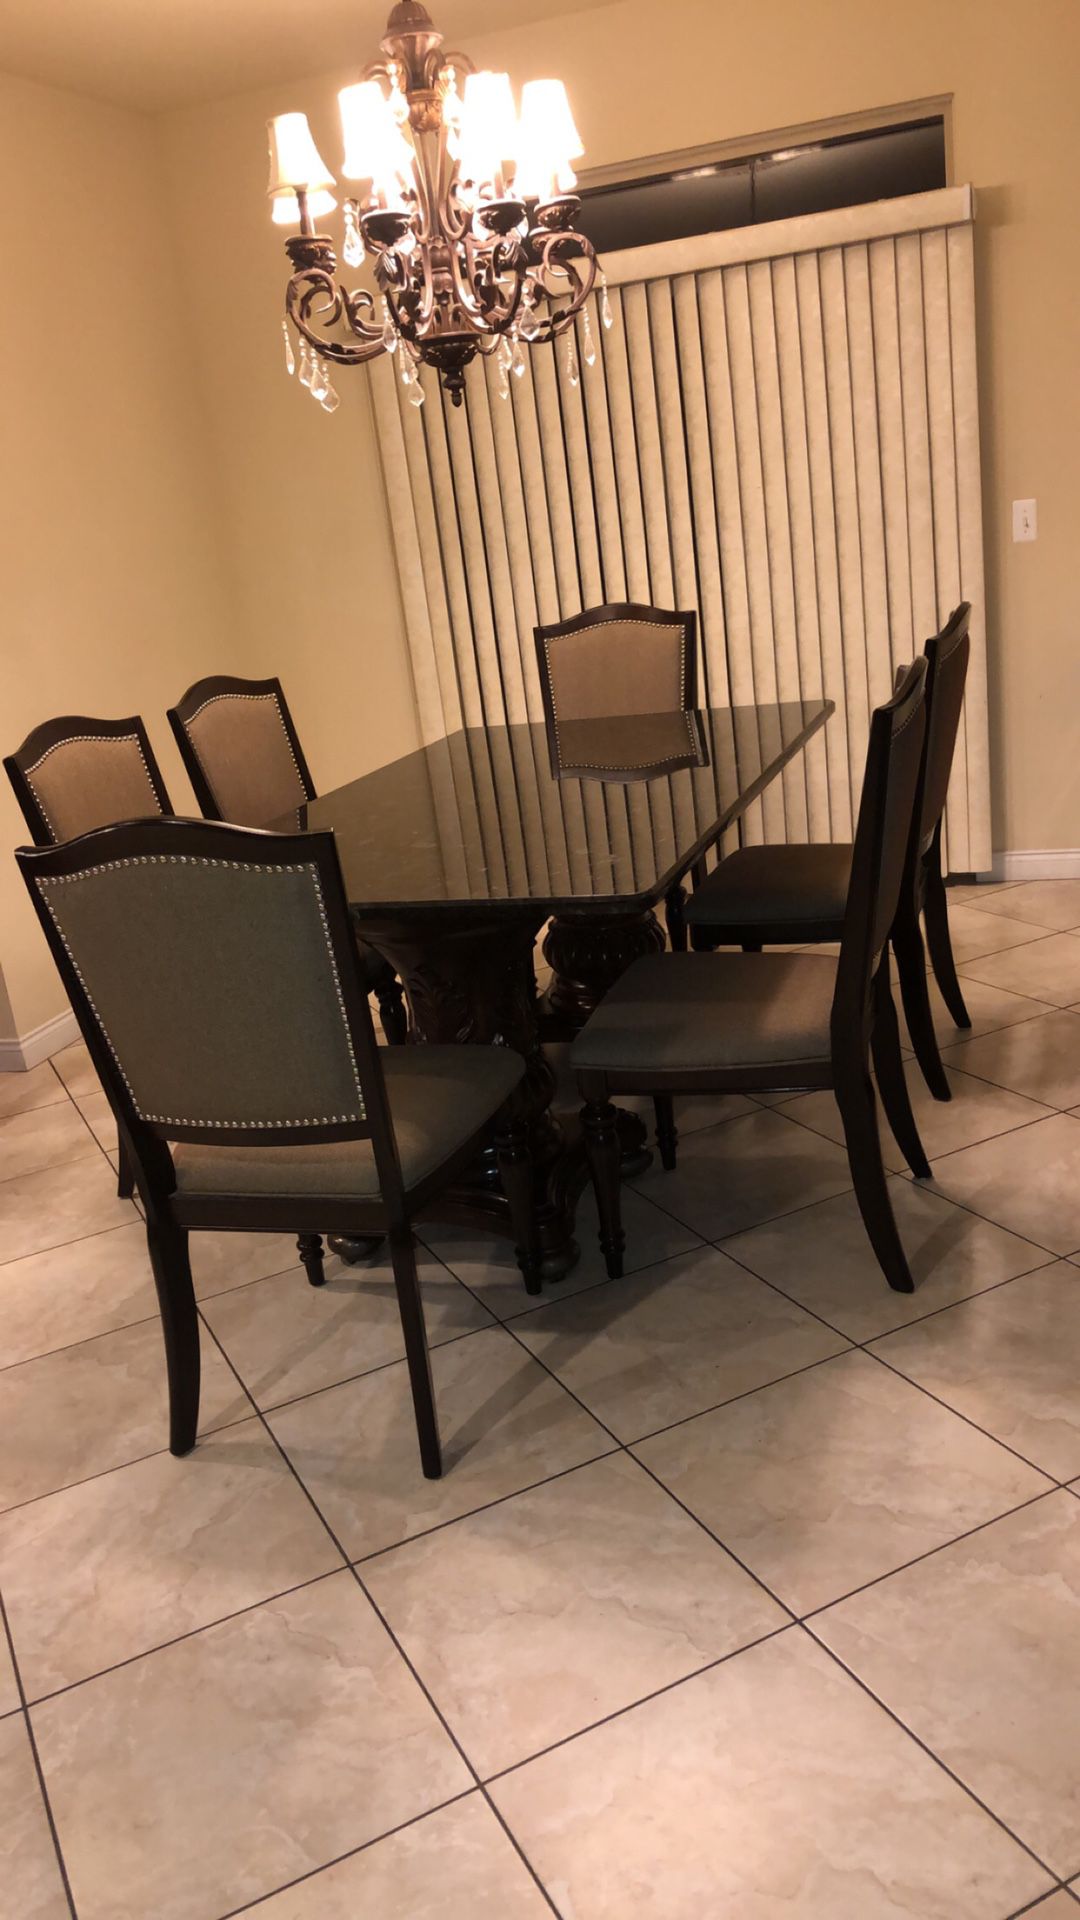 Granite dining room table with 6 chairs